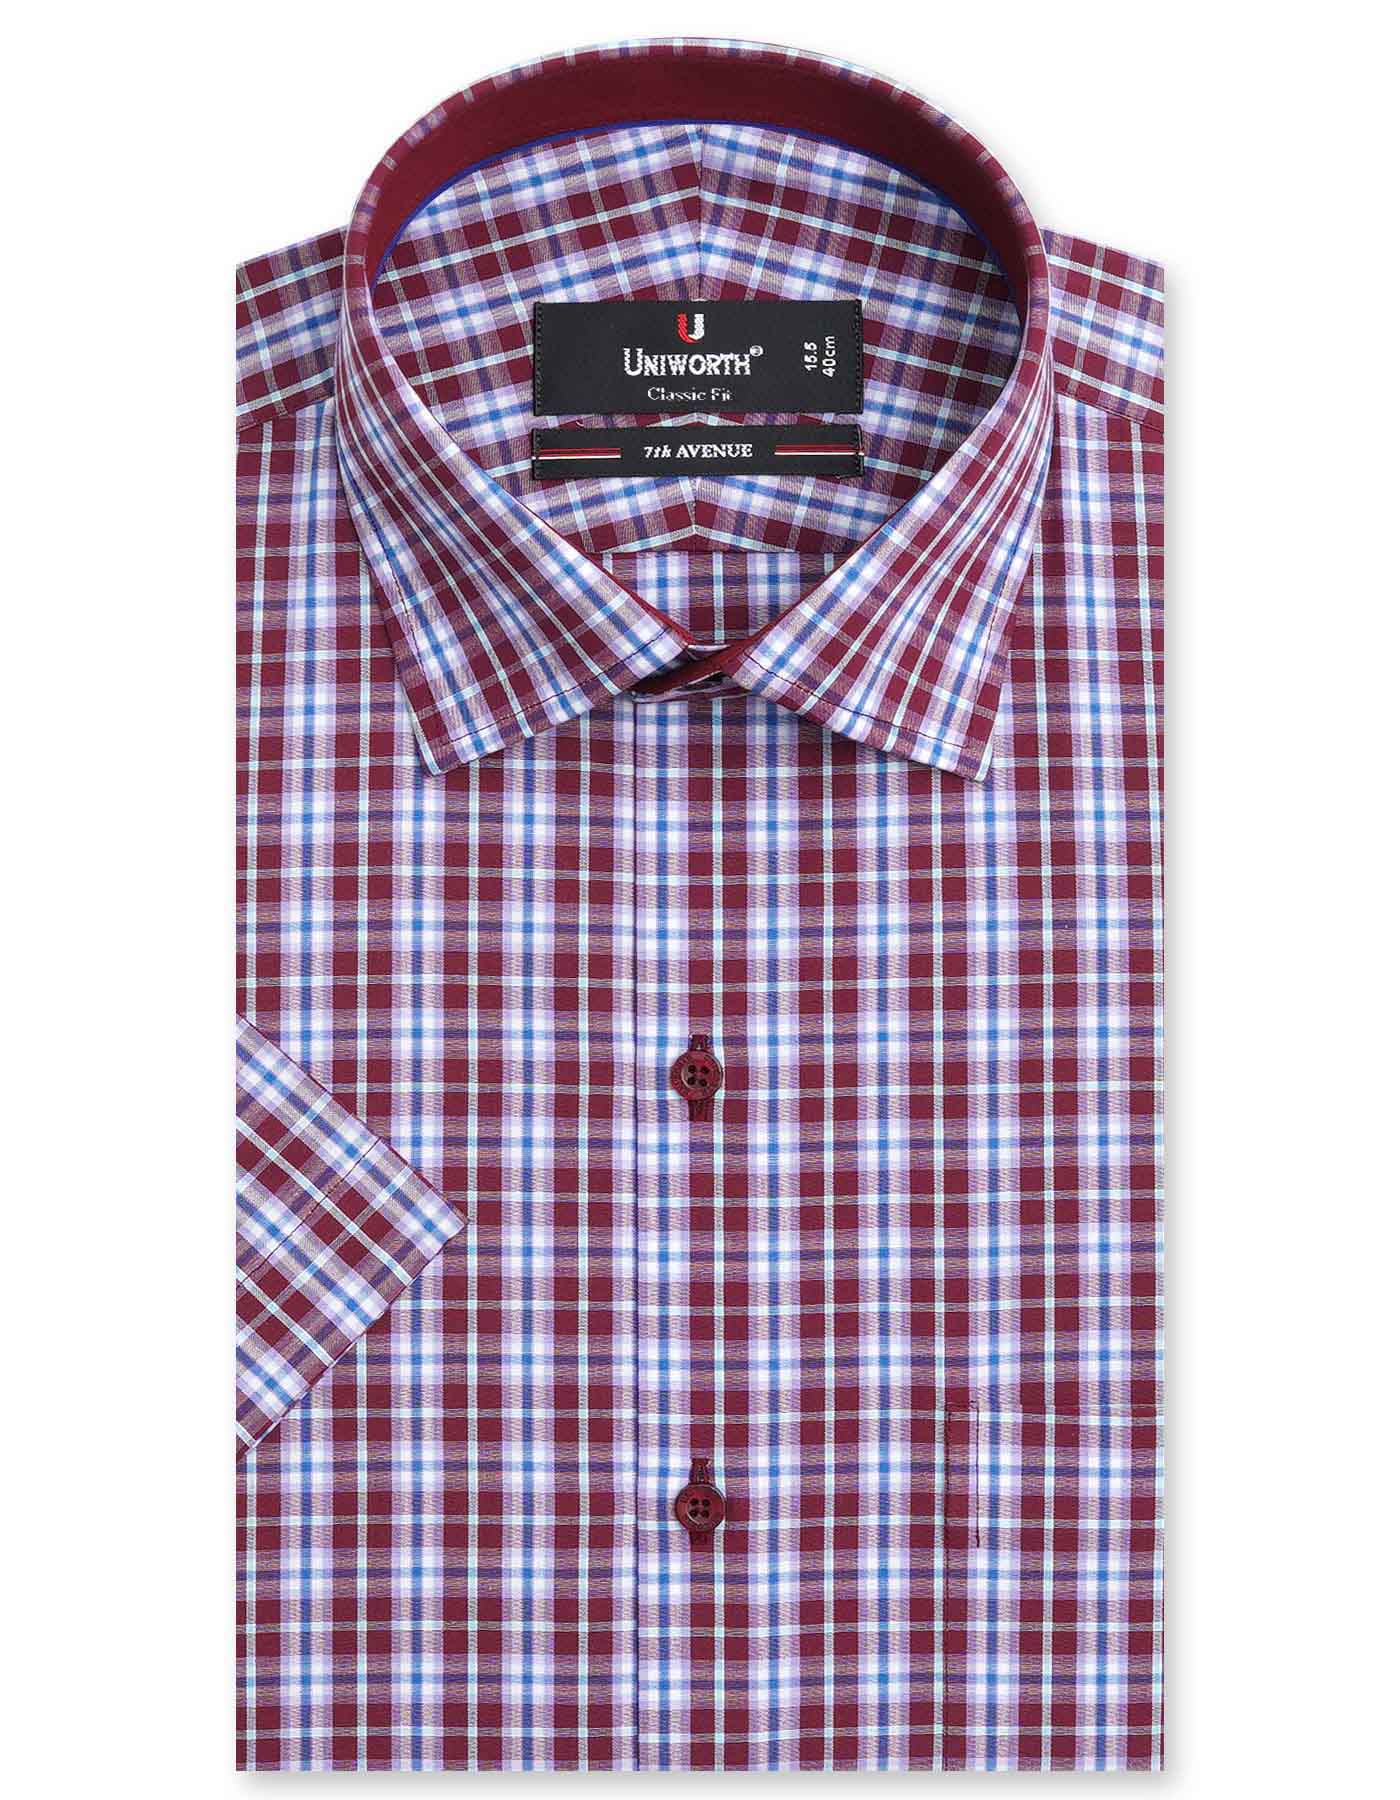 Check Shirts For Mens Online Shopping in Pakistan at Uniwoth Shop